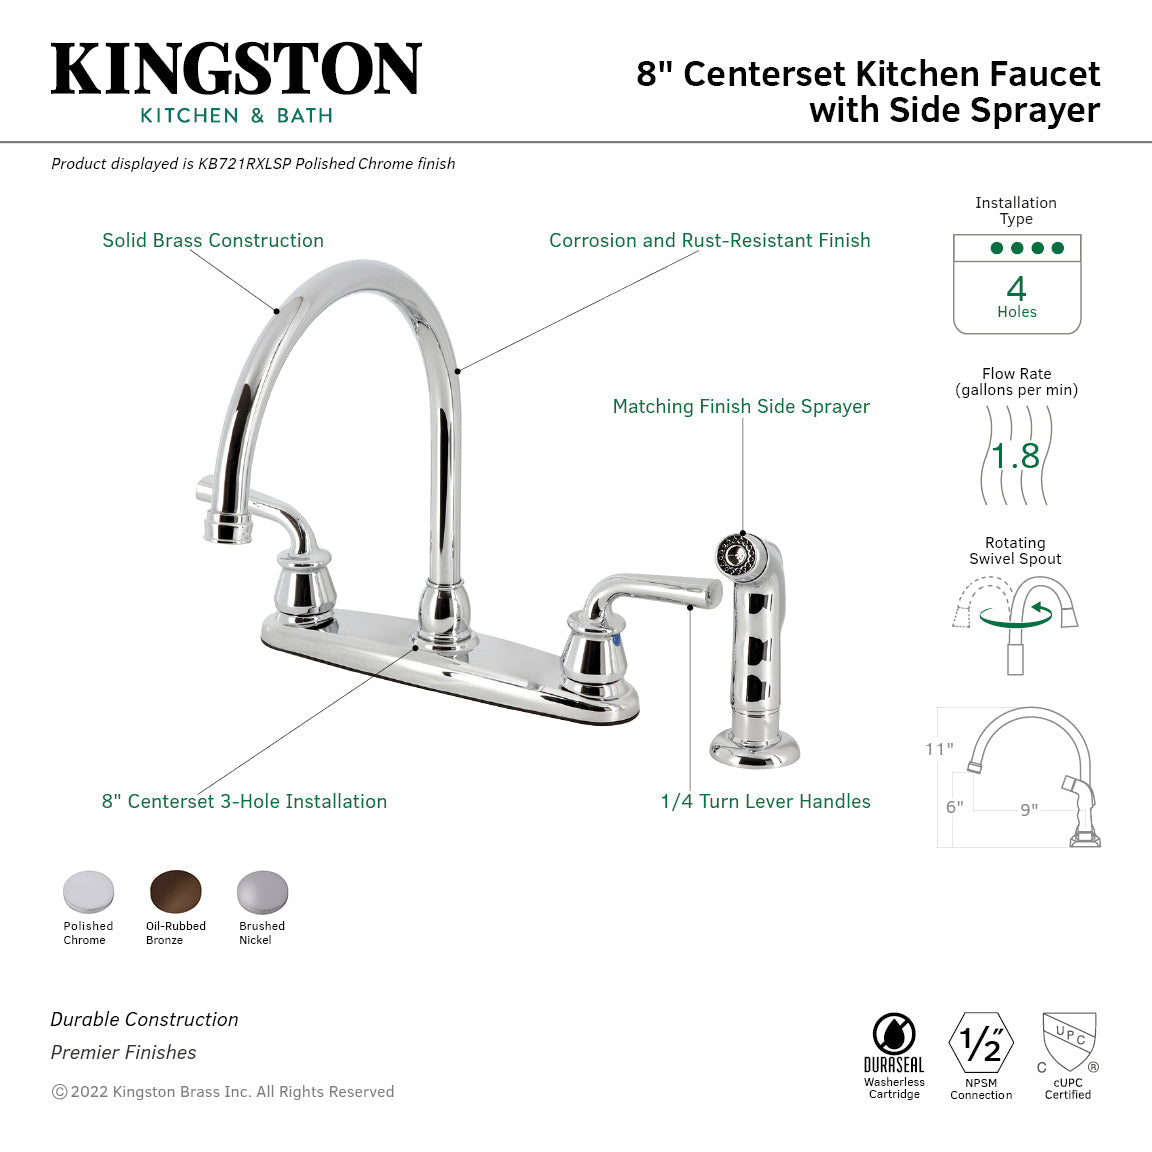 Restoration KB728RXLSP Two-Handle 4-Hole Deck Mount 8" Centerset Kitchen Faucet with Side Sprayer, Brushed Nickel